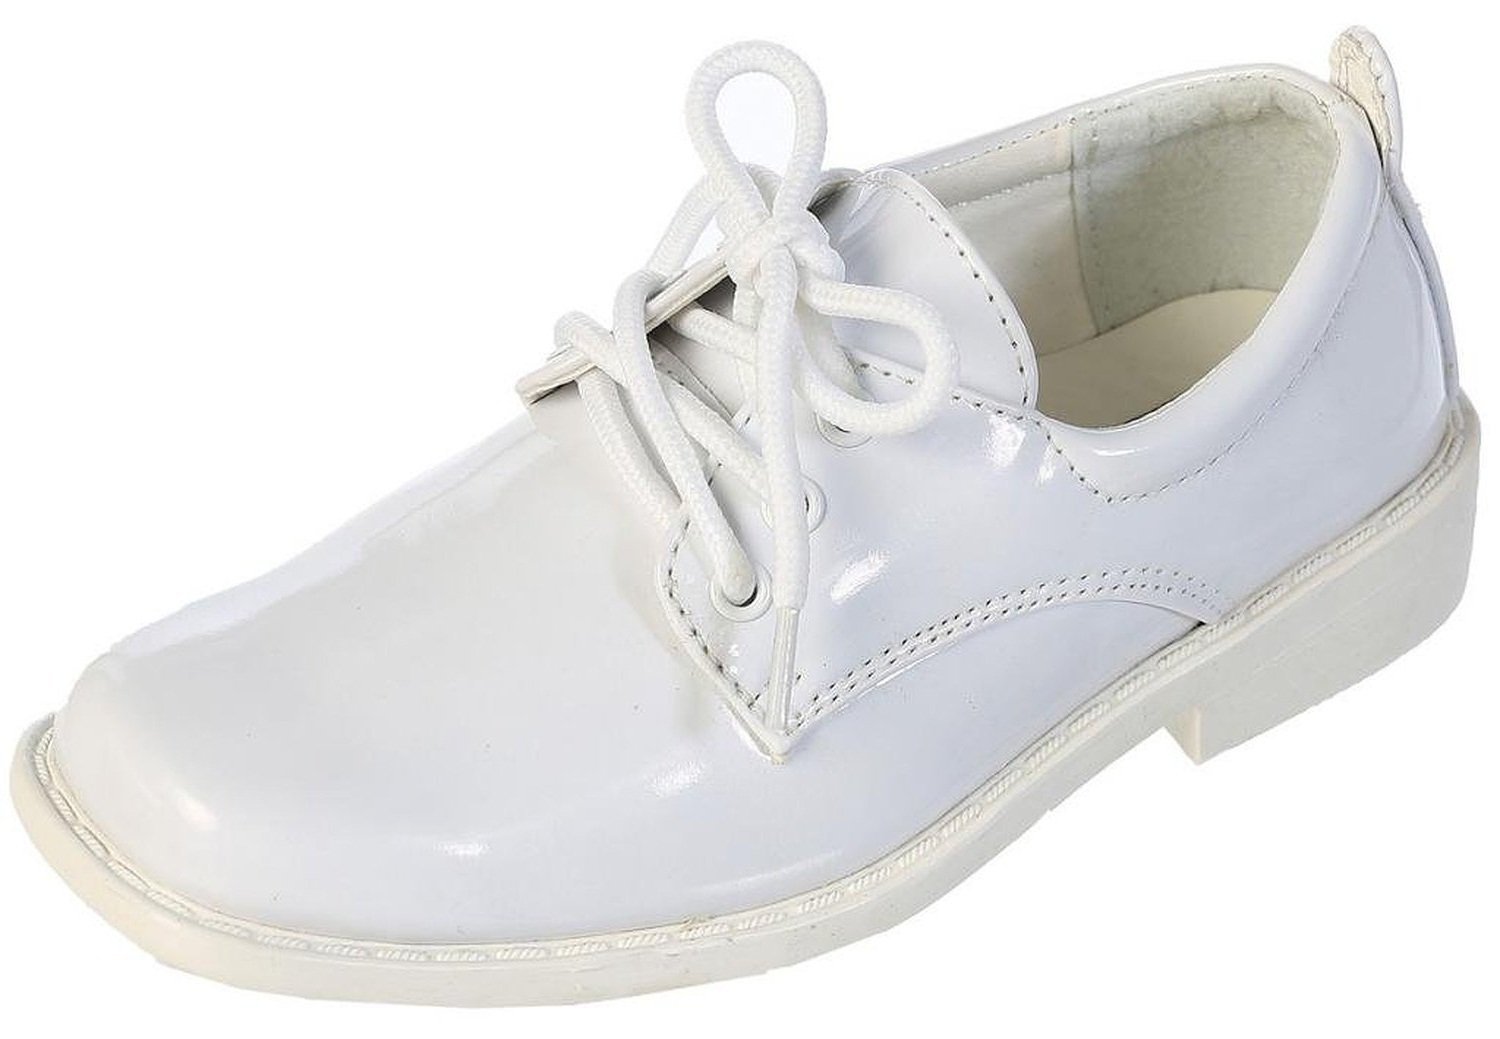 Boys Square Toe Lace Up Oxford Patent Dress Shoes - Available in White 12 Little Kid